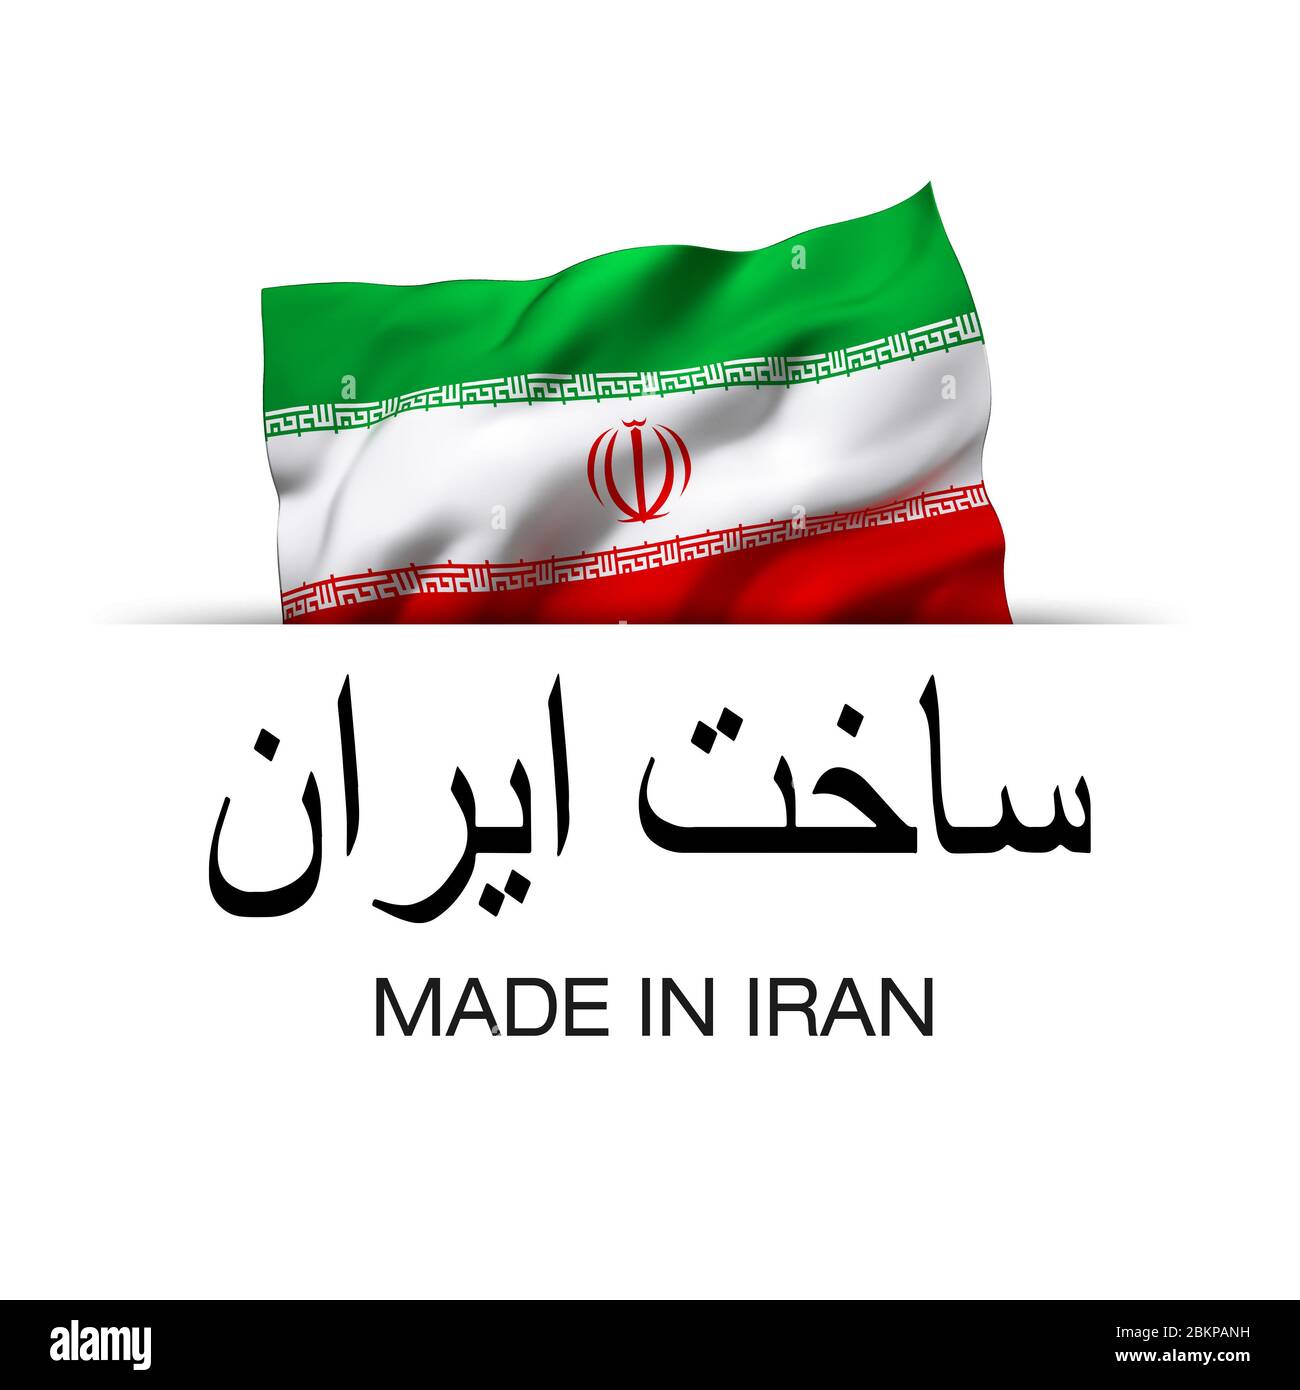 Made in Iran written in Persian language. Guarantee label with a waving Iranian flag. 3D illustration. Stock Photo